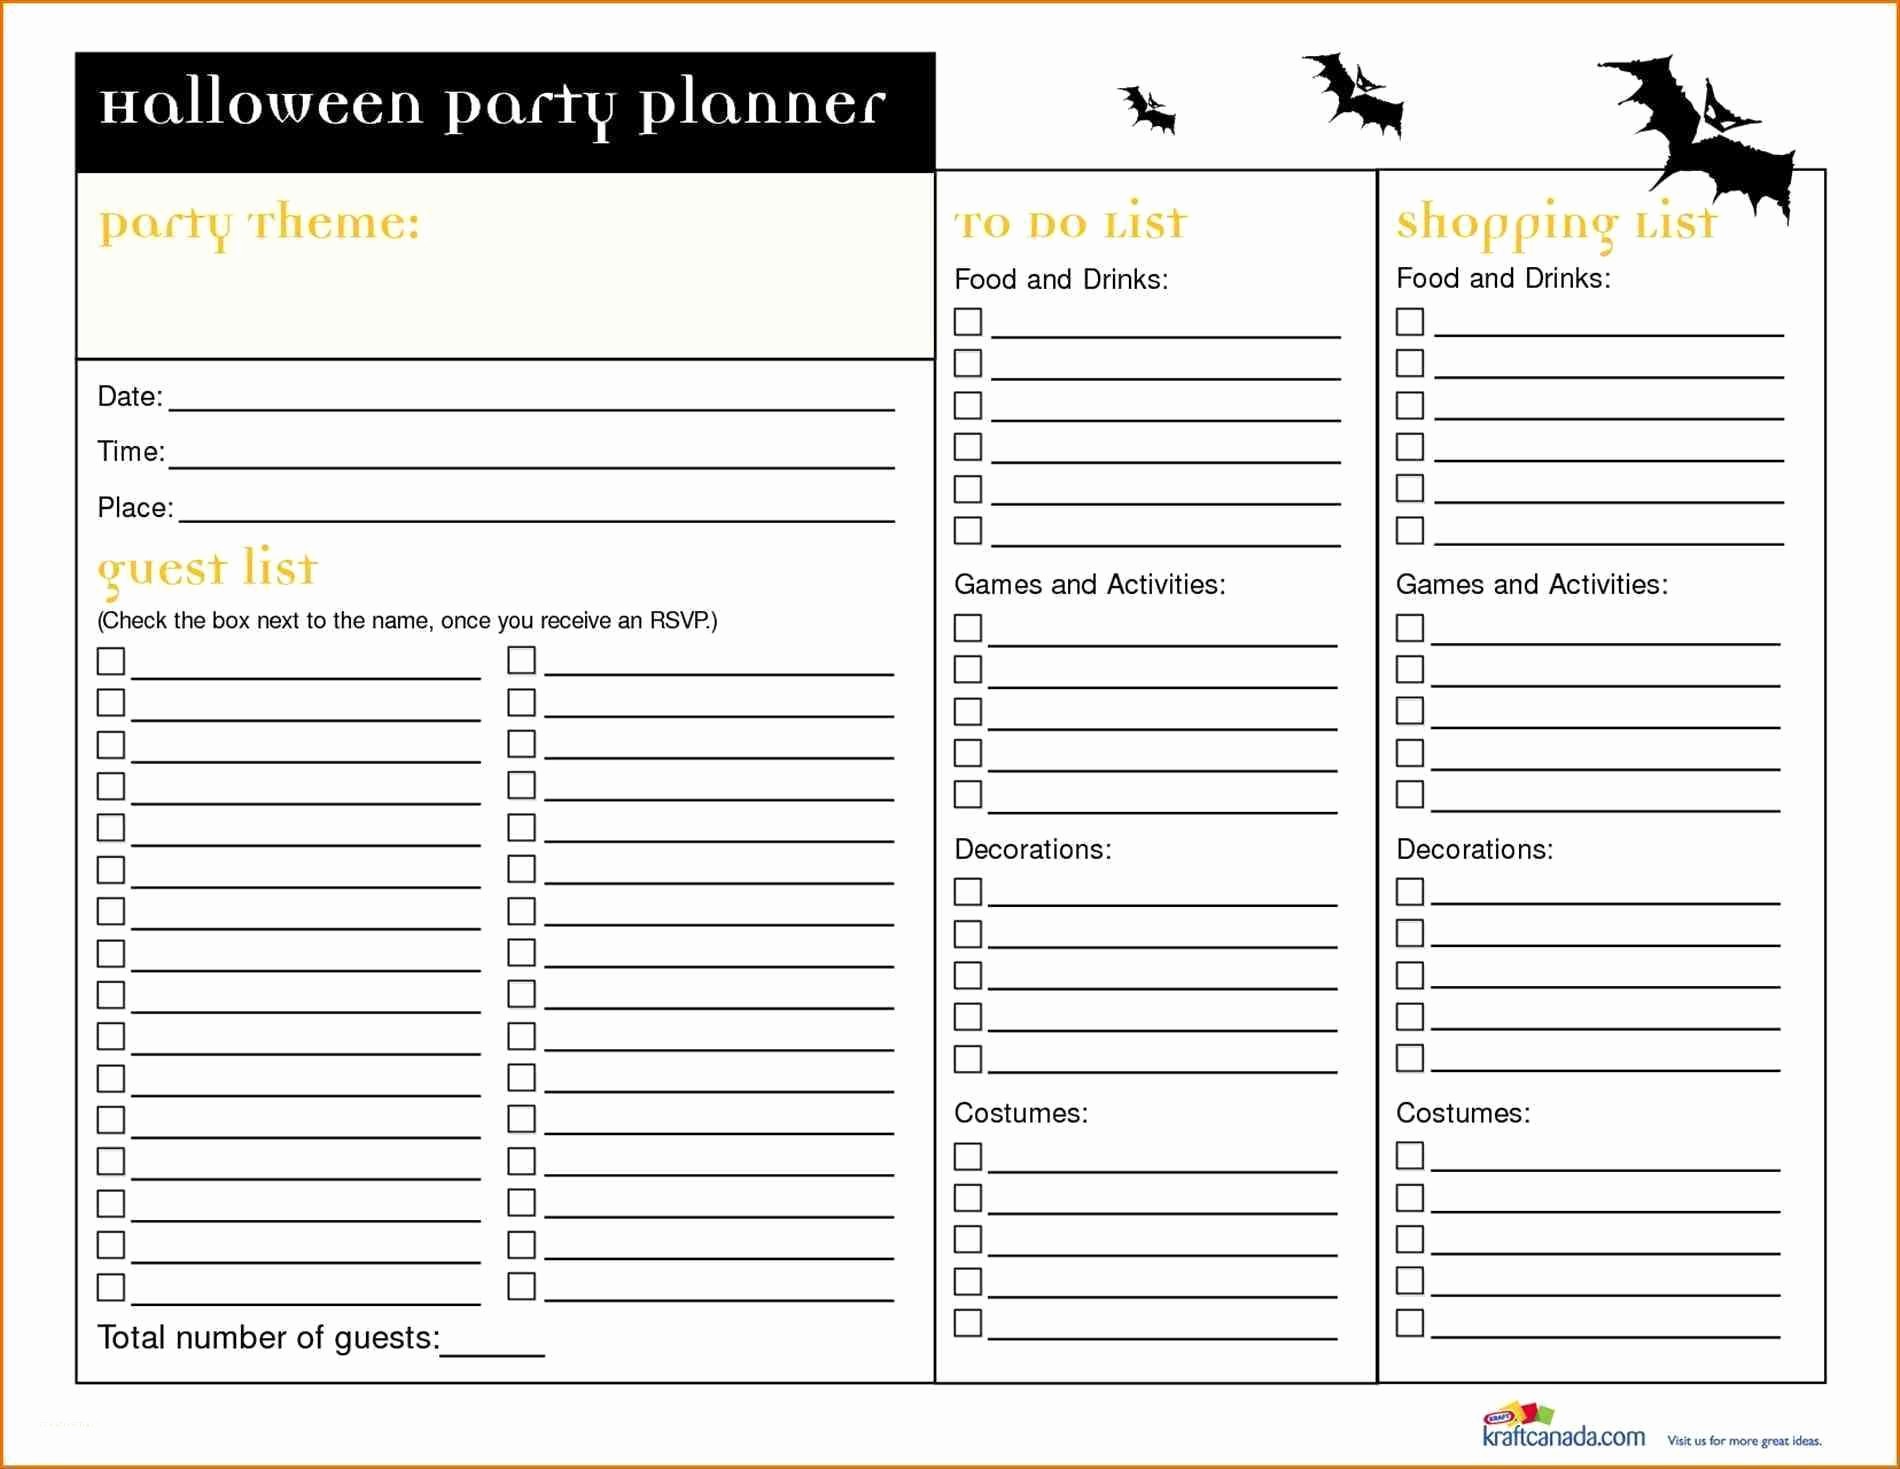 Party Planner Checklist Template Free Beautiful Birthday Party Planner Template Inspirational Planning